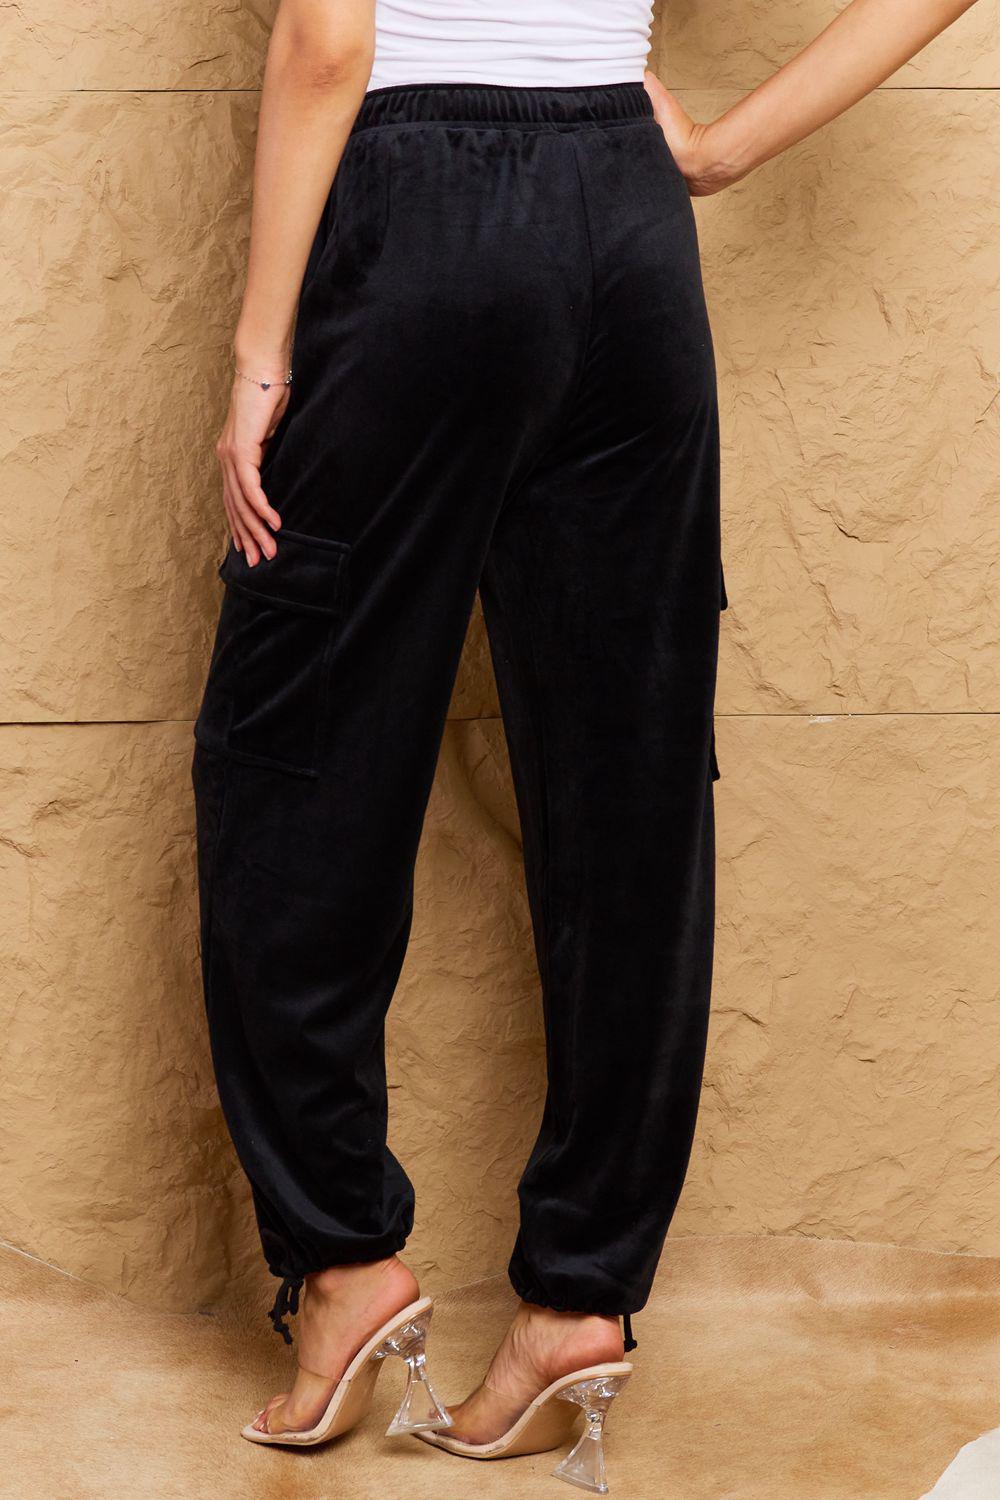 HYFVE Chic For Days High Waist Drawstring Cargo Pants in Black BLUE ZONE PLANET